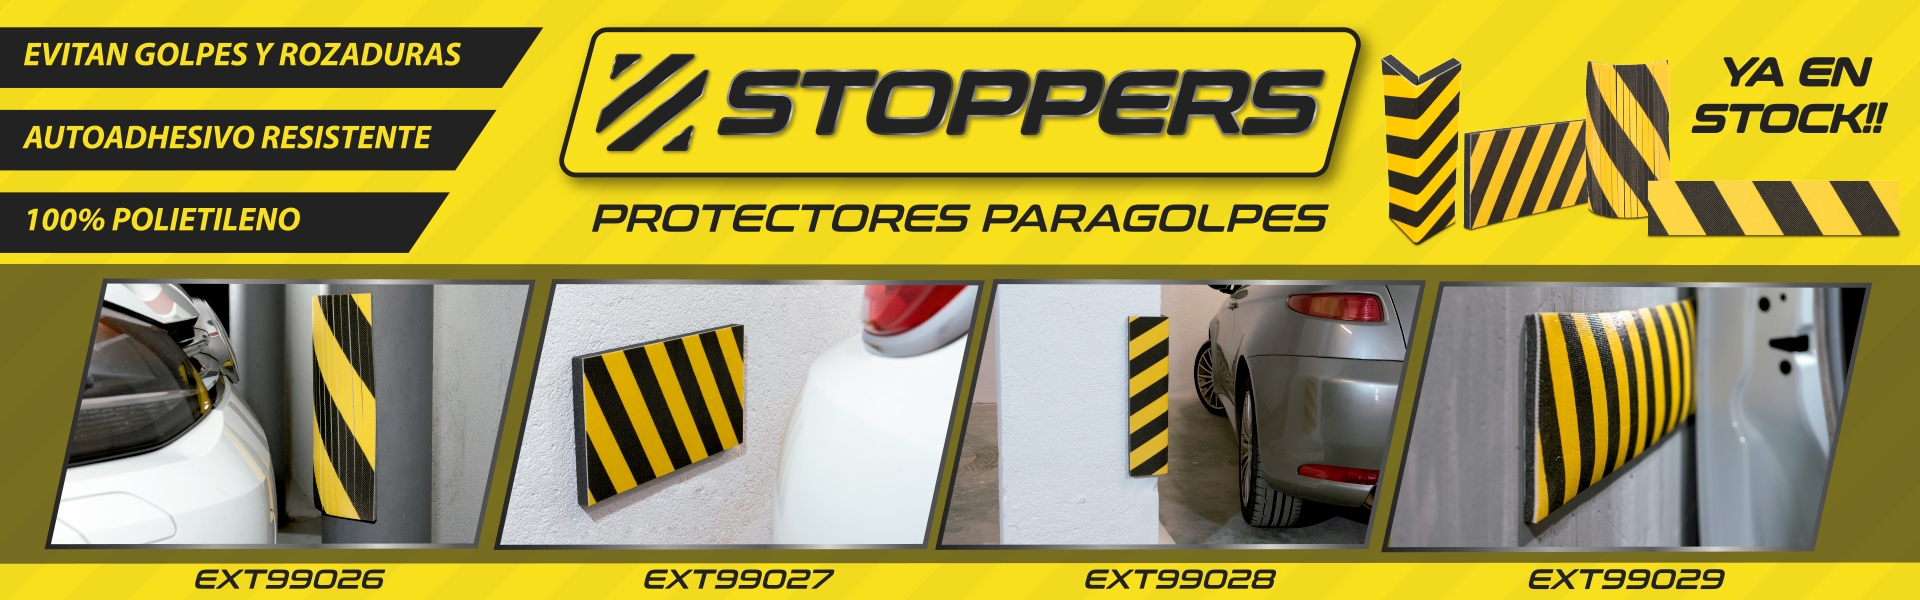 PROTECTORES PARAGOLPES STOPPERS